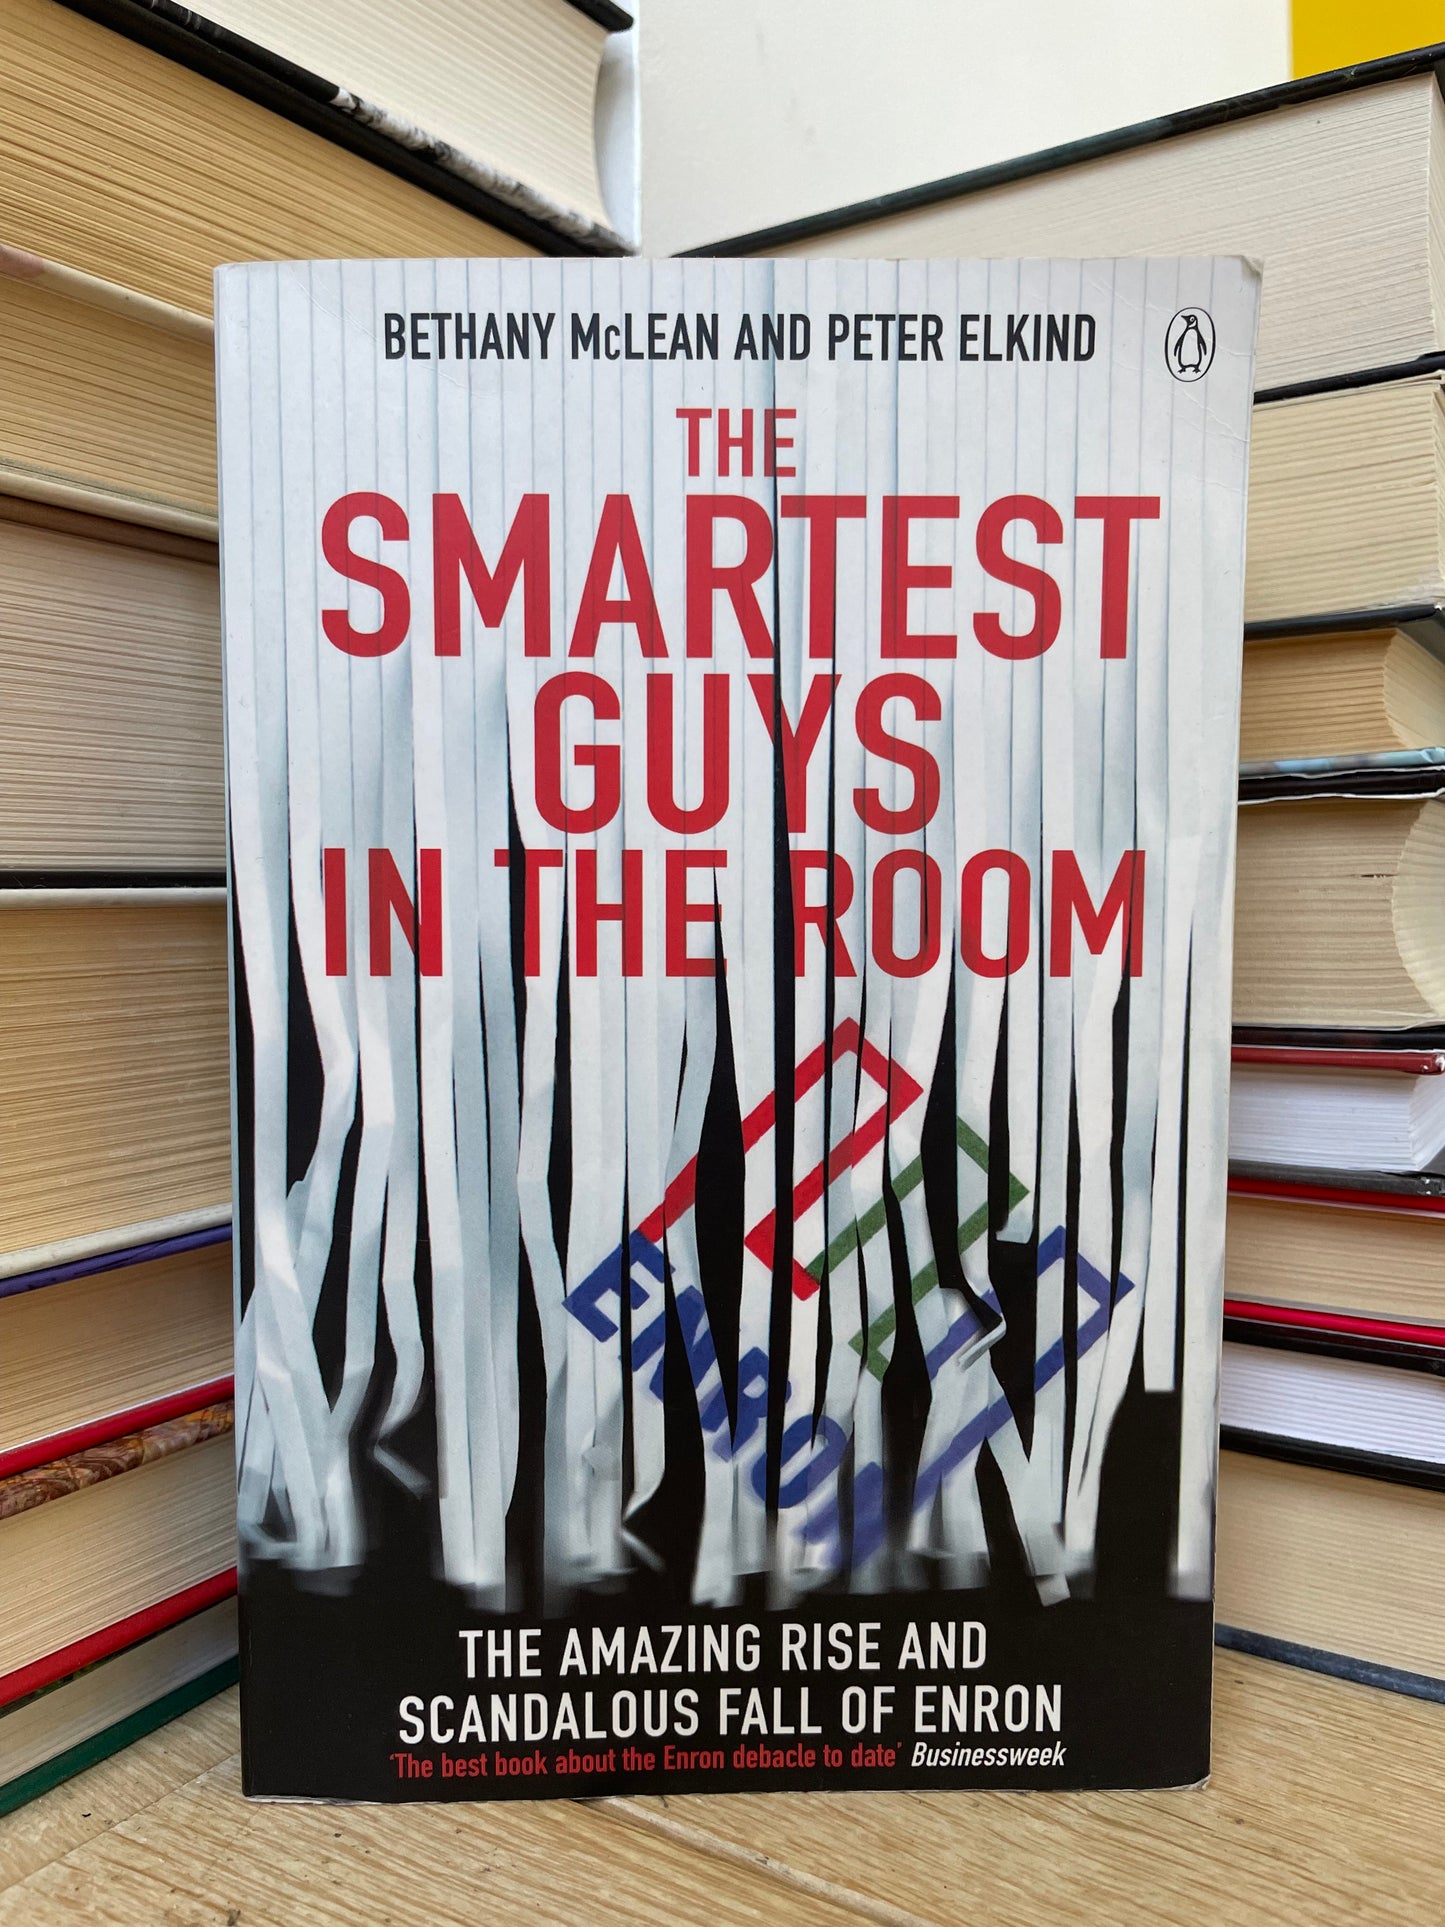 Bethany McLean and Peter Elkind - The Smartest Guys in the Room: The Amazing Rise and Scandalous Falls of Enron